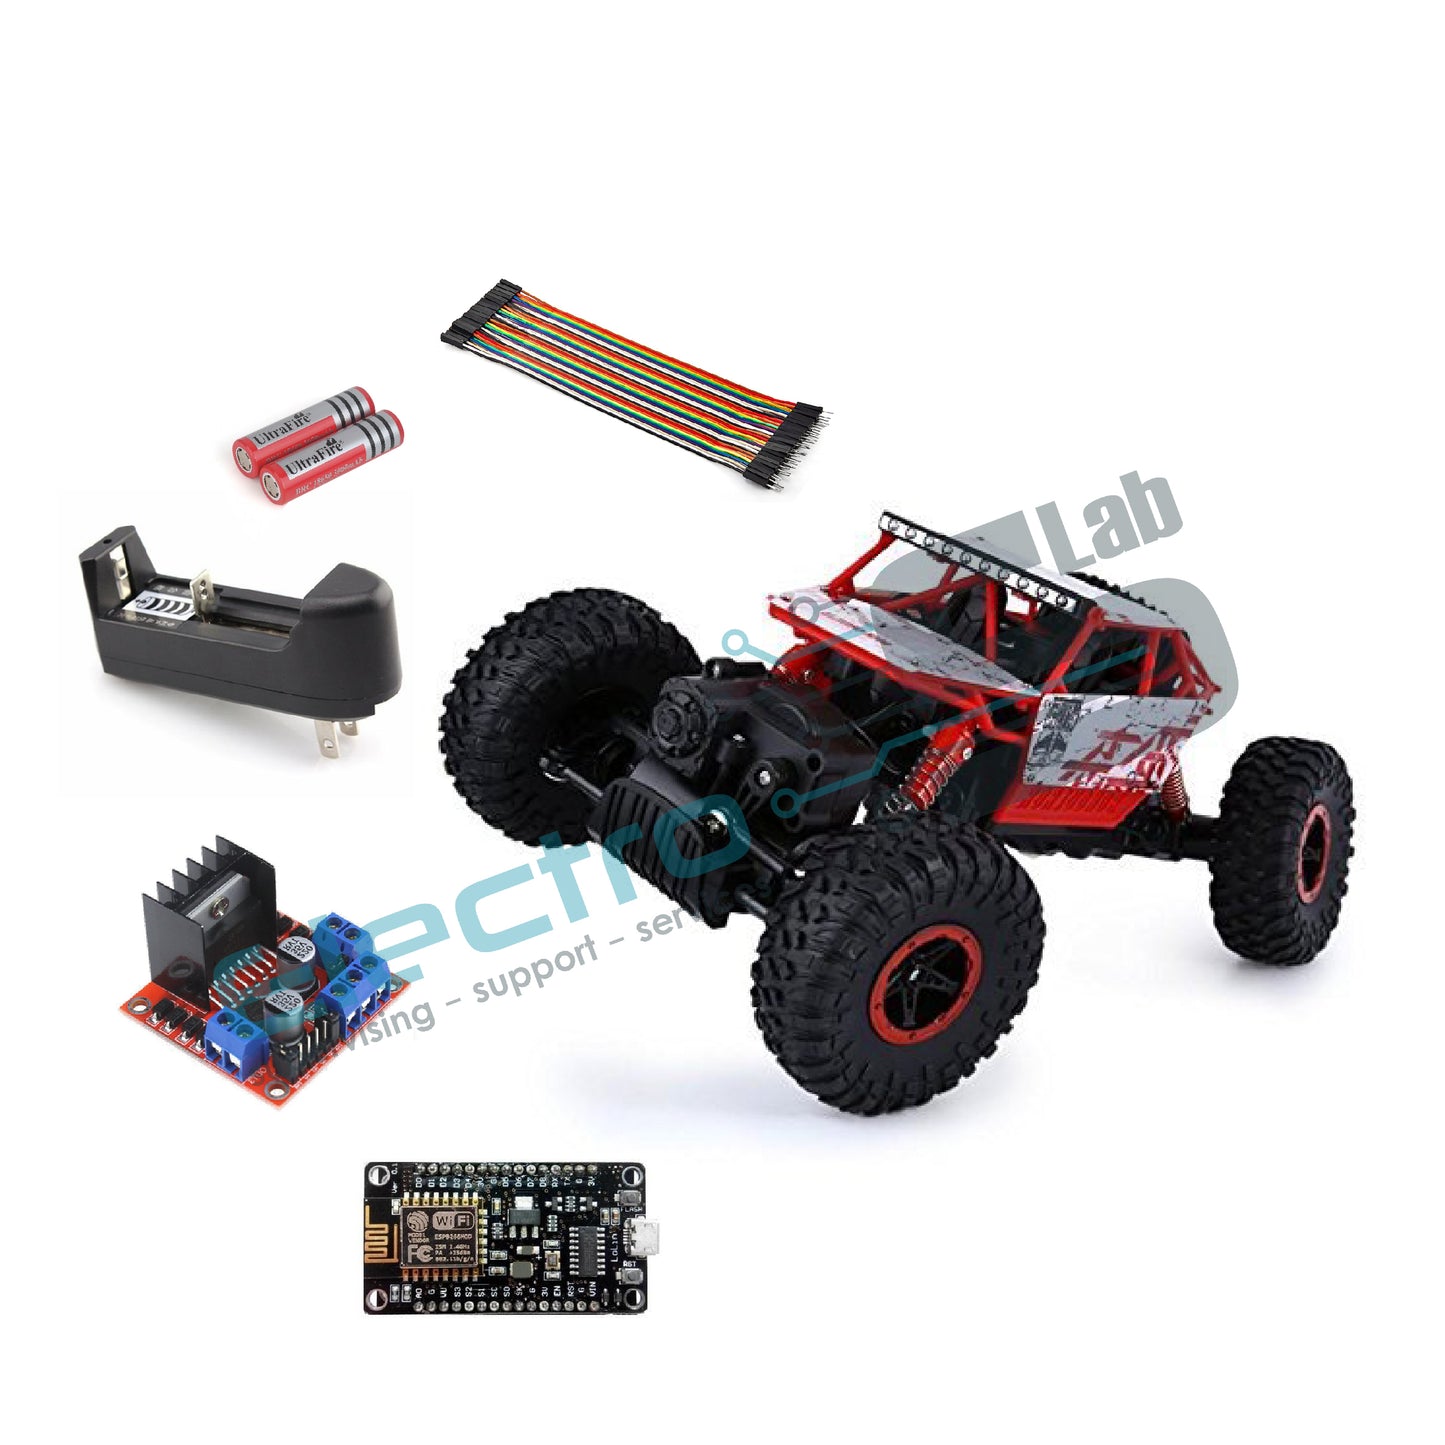 Generic Rock Crawlers Driving Car Chassis + Wifi Kit: 4WD Double Motors Drive Bigfoot 1:18 Model modify part robot car chassis SN170